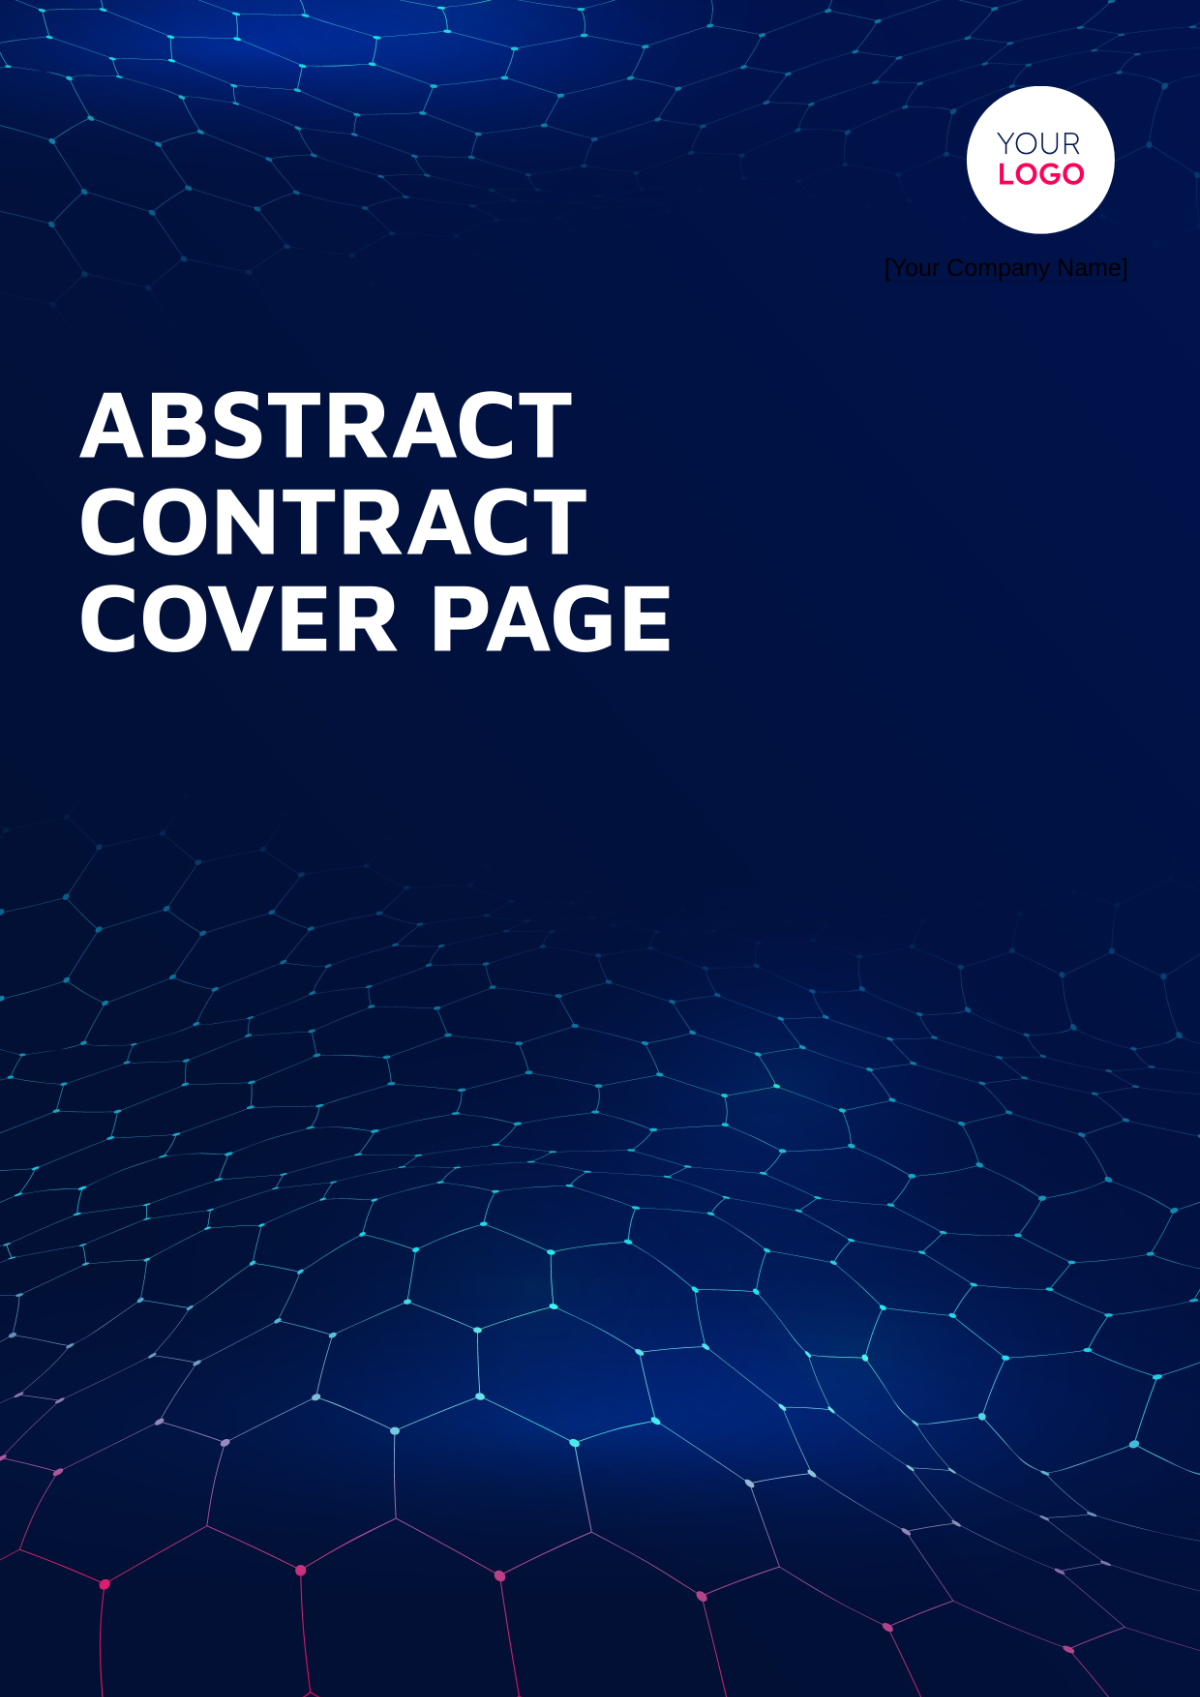 Abstract Contract Cover Page Template